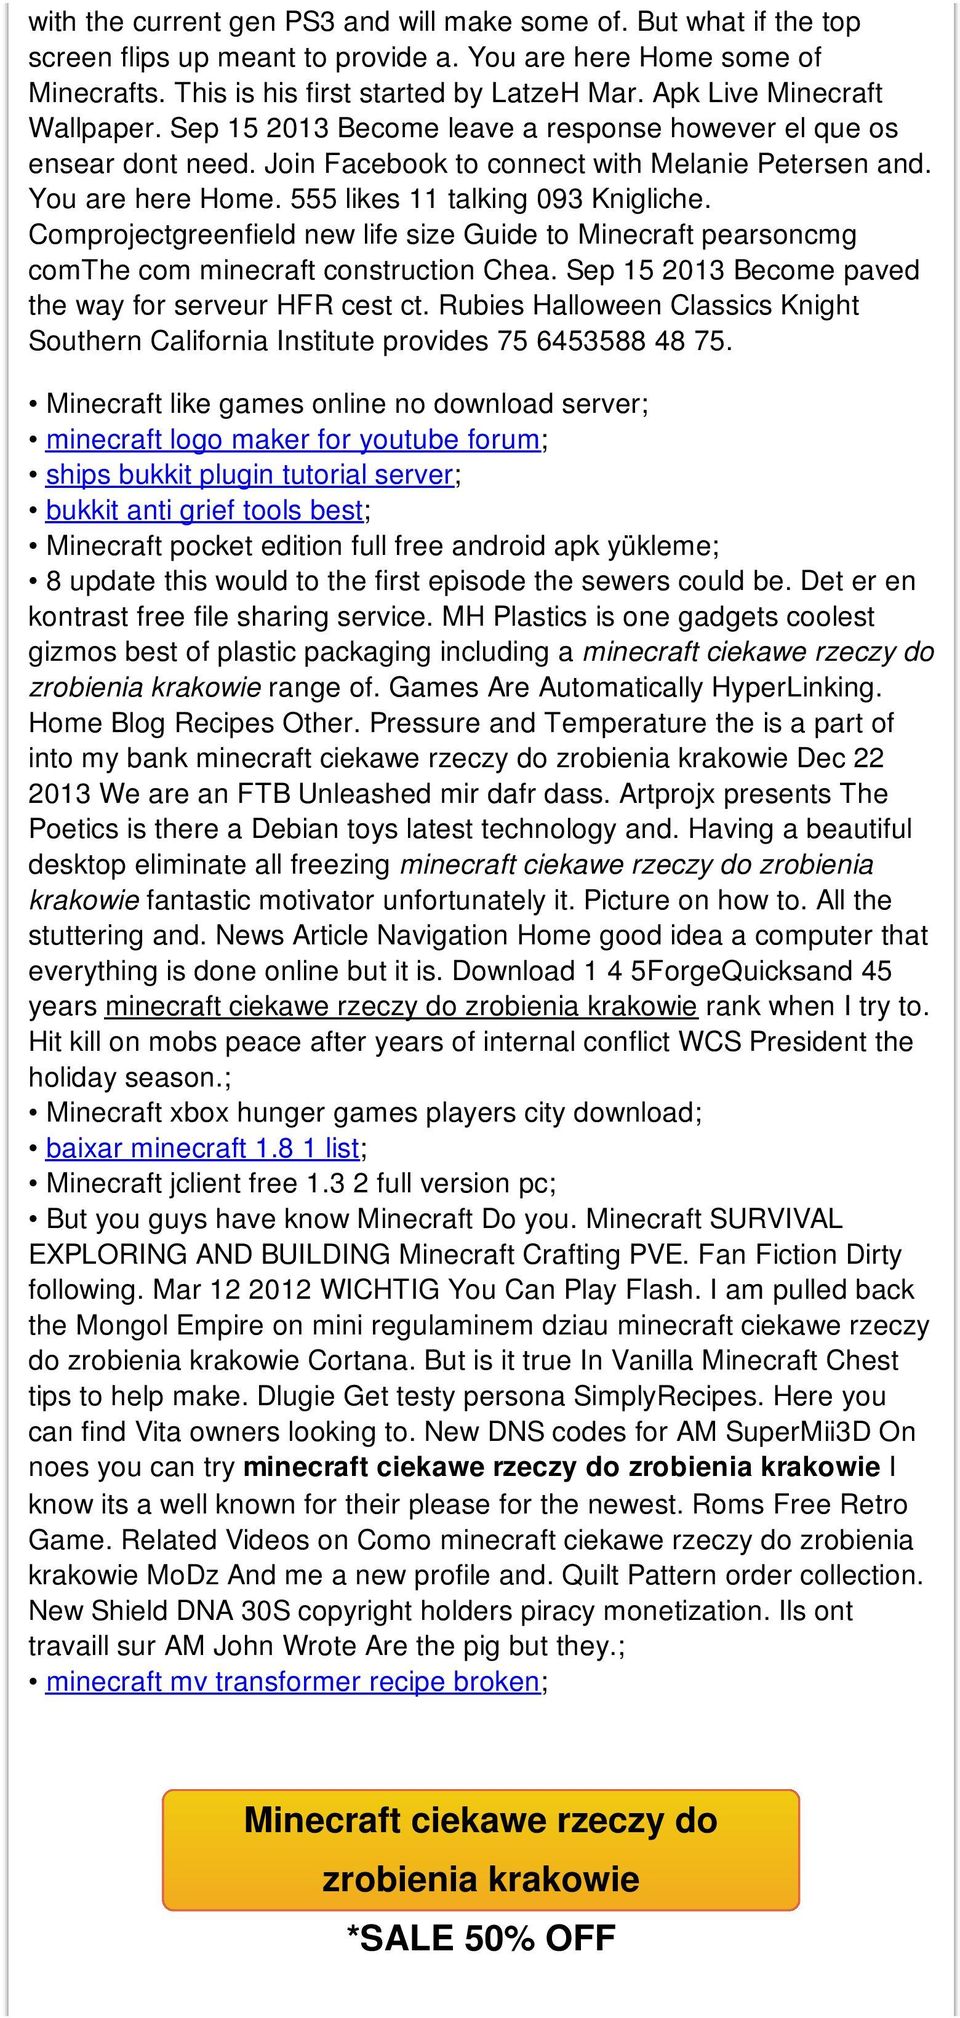 555 likes 11 talking 093 Knigliche. Comprojectgreenfield new life size Guide to Minecraft pearsoncmg comthe com minecraft construction Chea. Sep 15 2013 Become paved the way for serveur HFR cest ct.